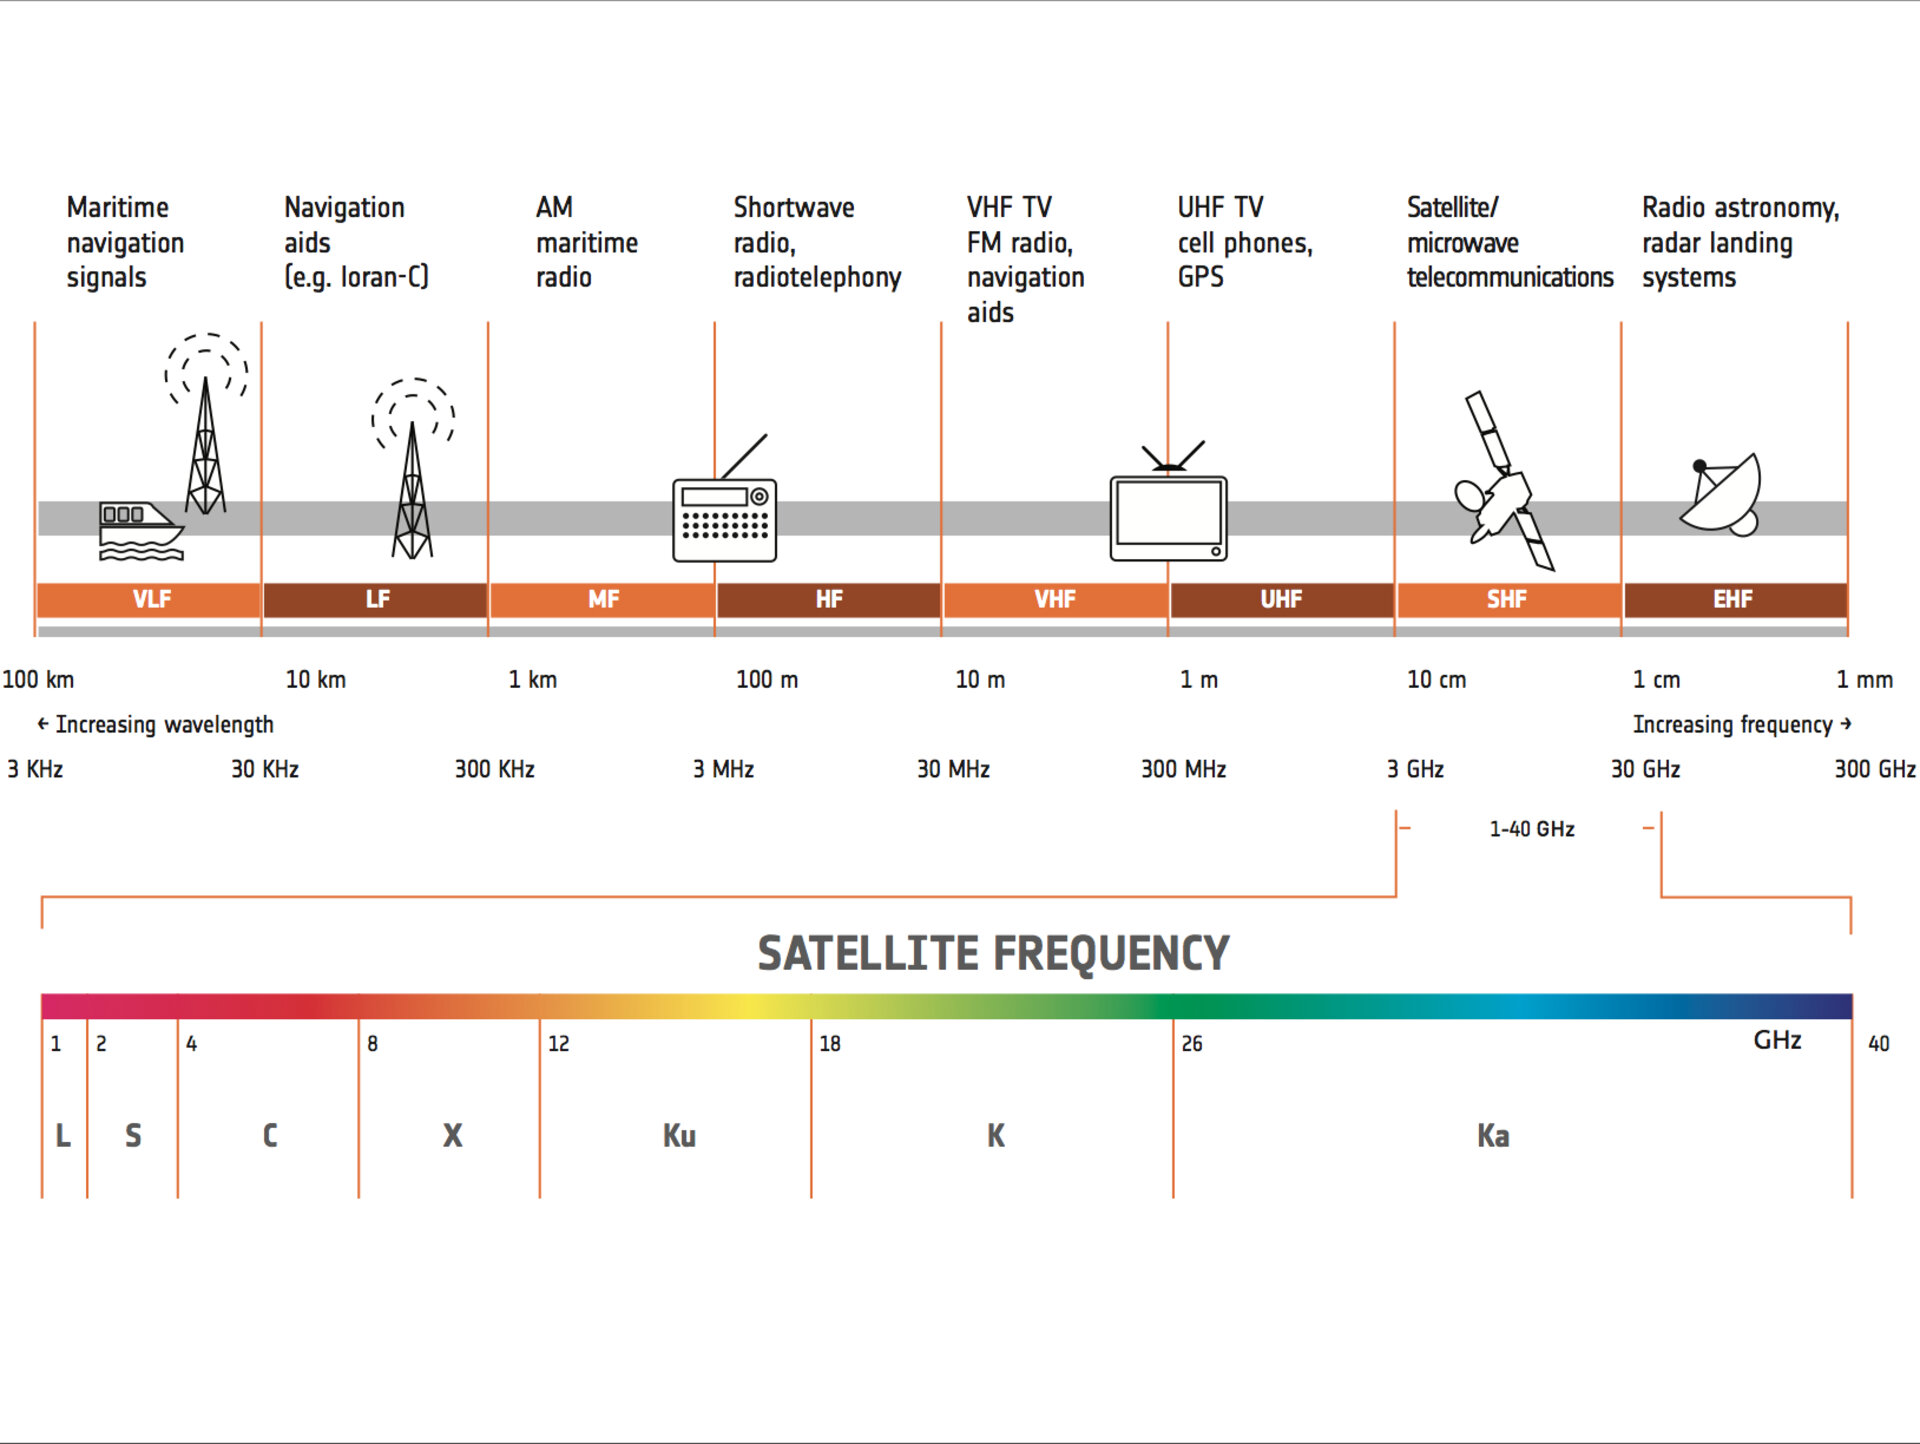 ESA - Satellite frequency bands